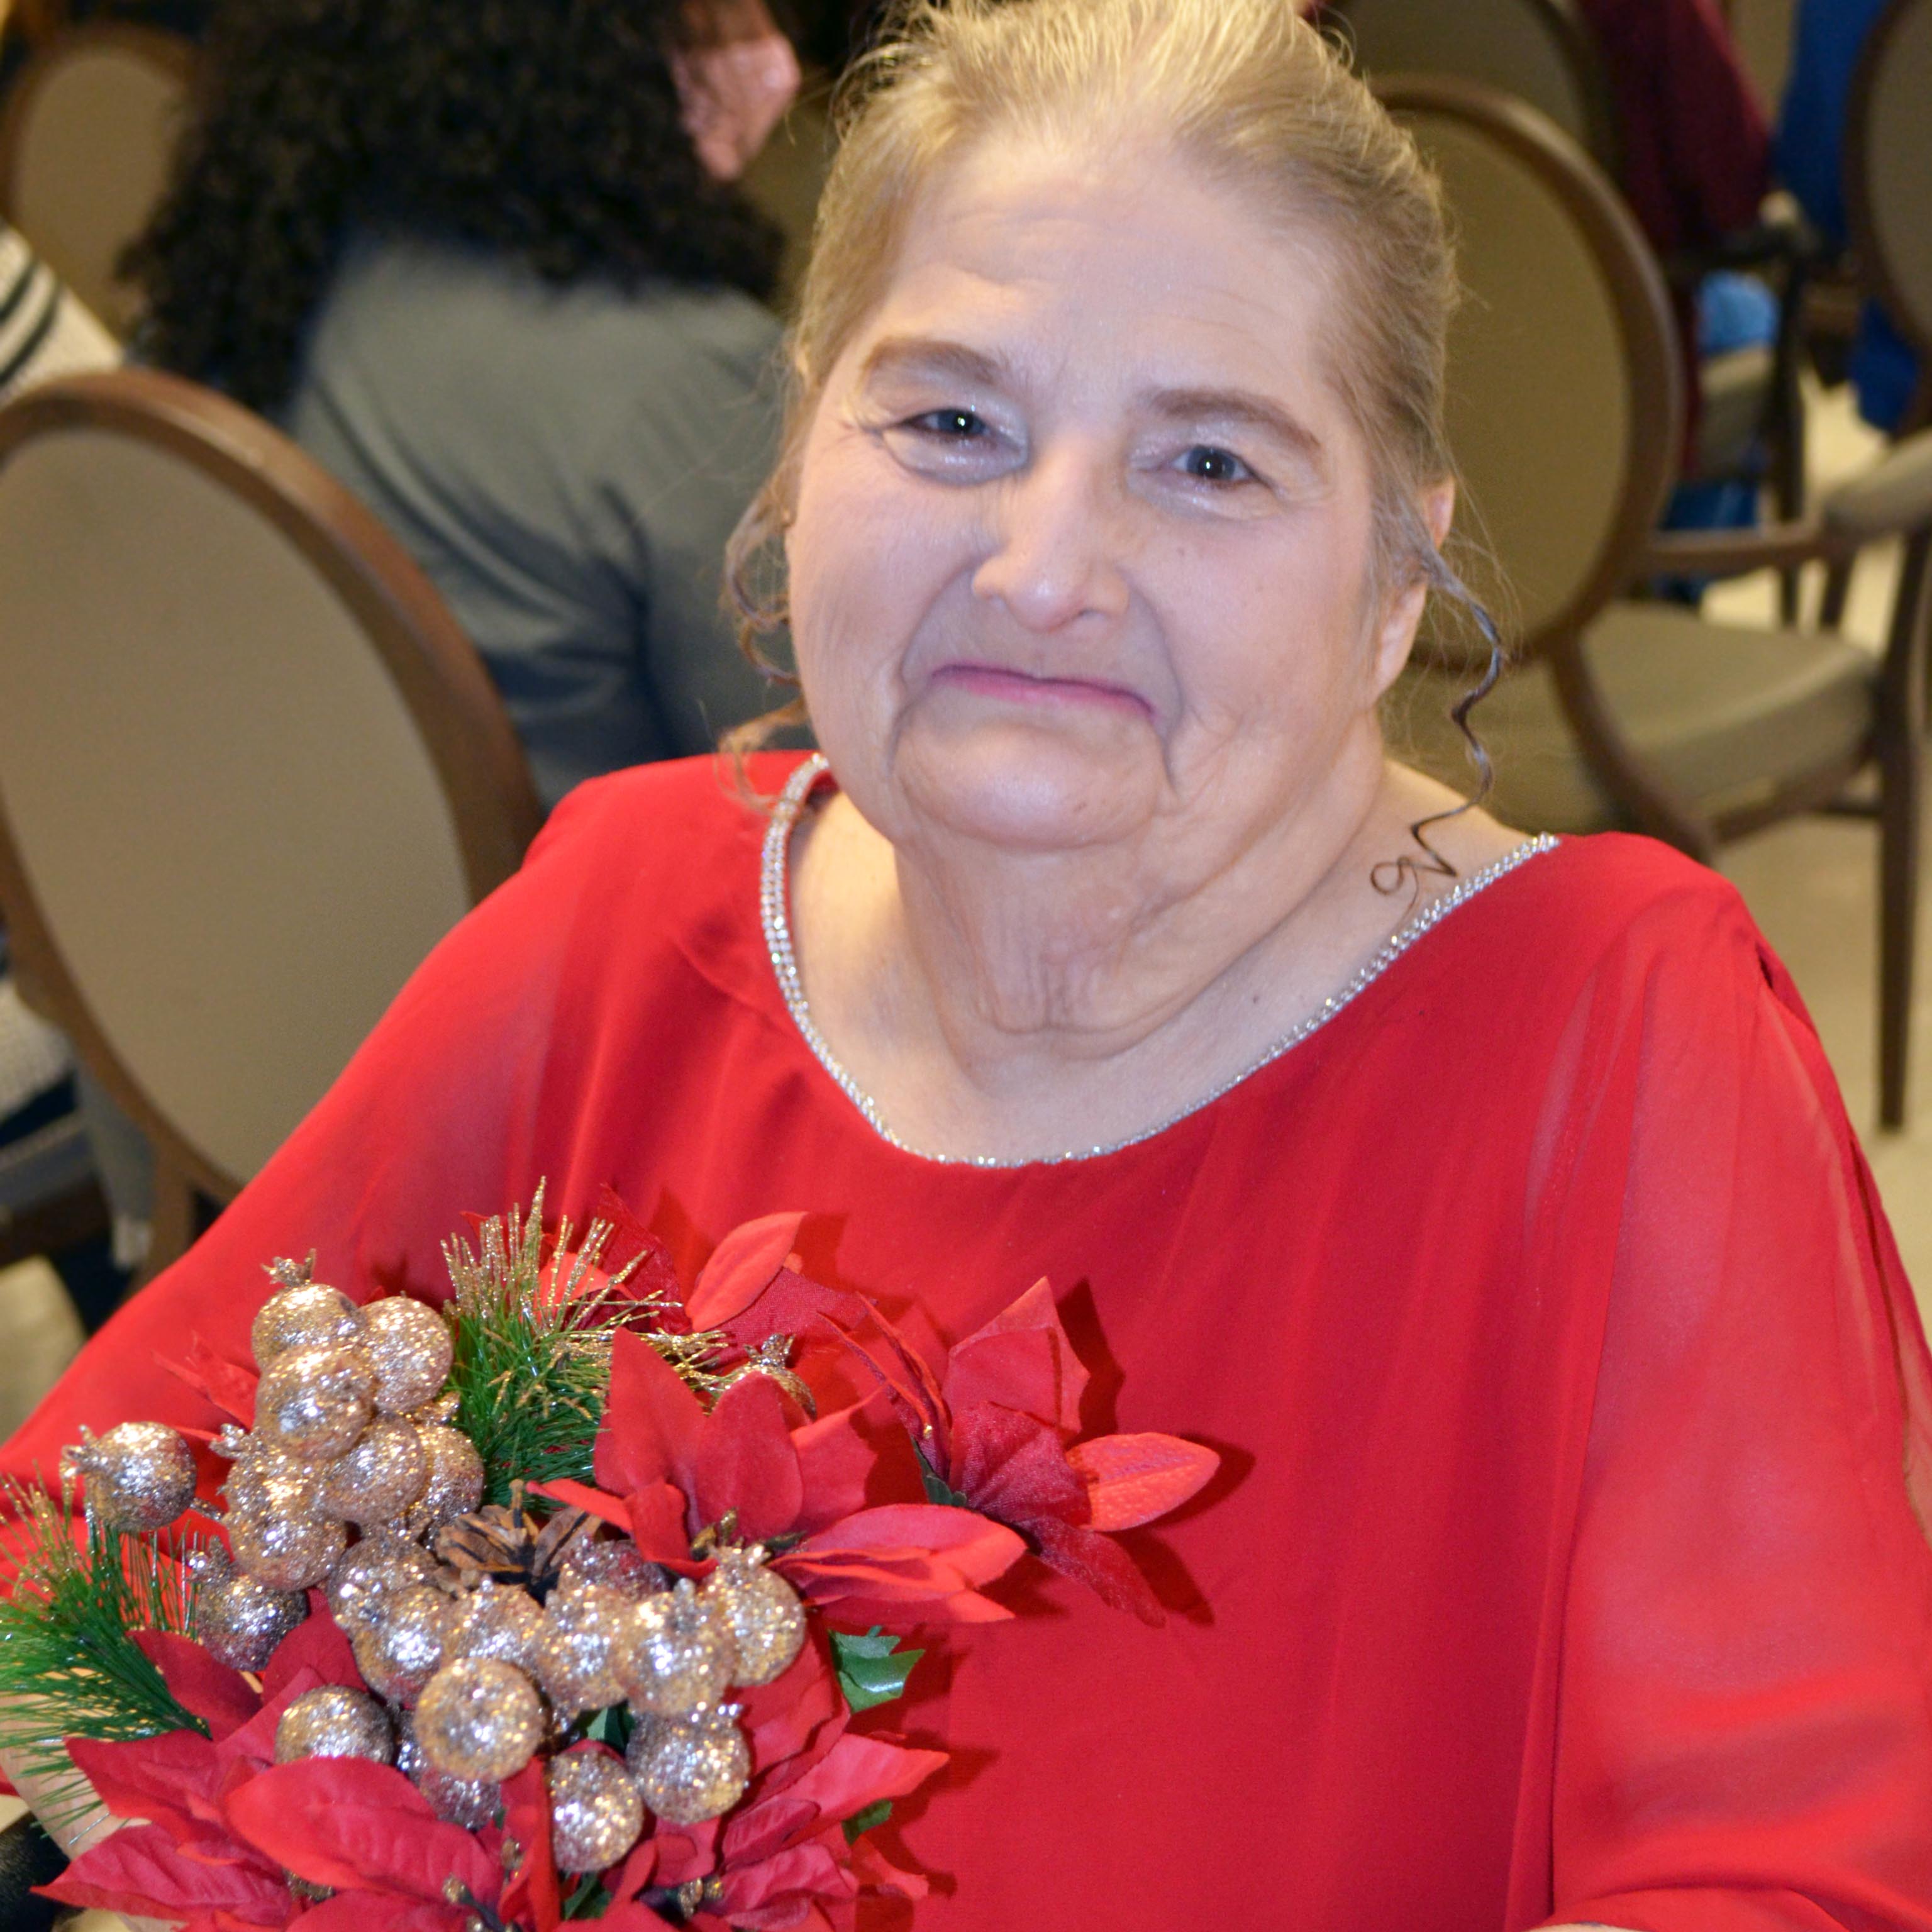 Photo of Doreen smiling while holding wedding flowers